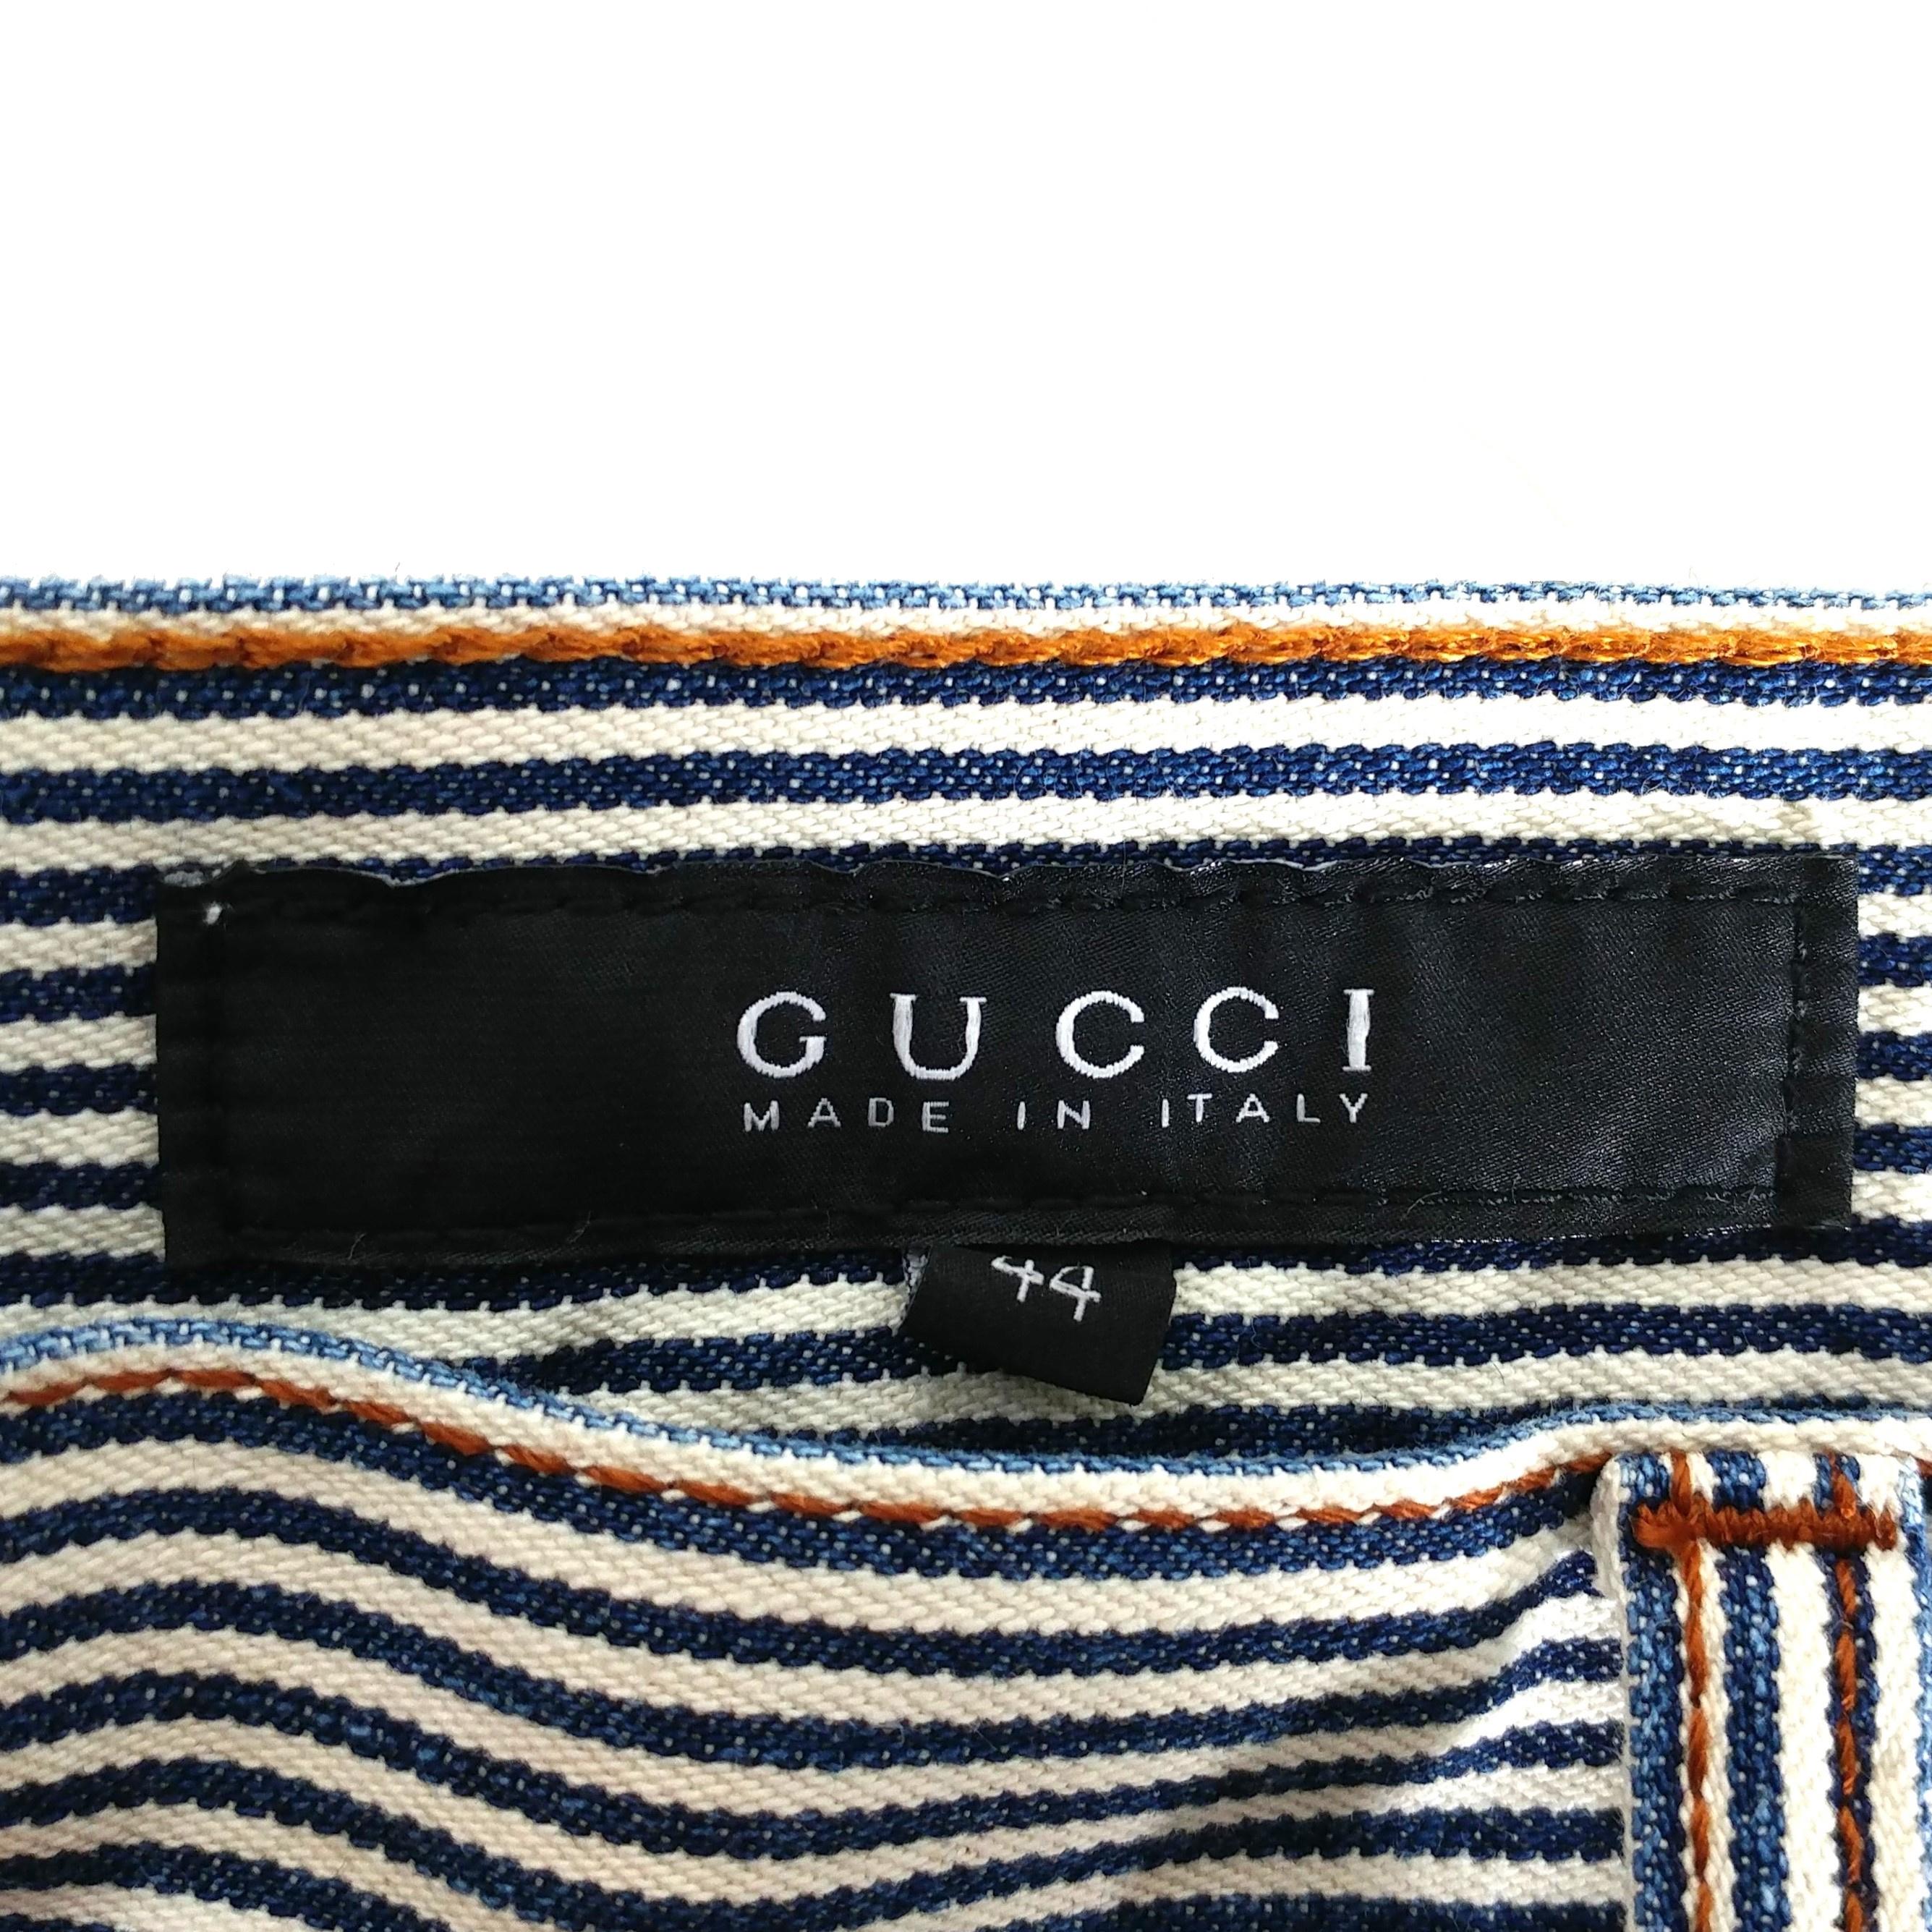 Women's GUCCI - New with Tags - Cotton Jeans with White and Blue Stripes  Size 8US 40EU